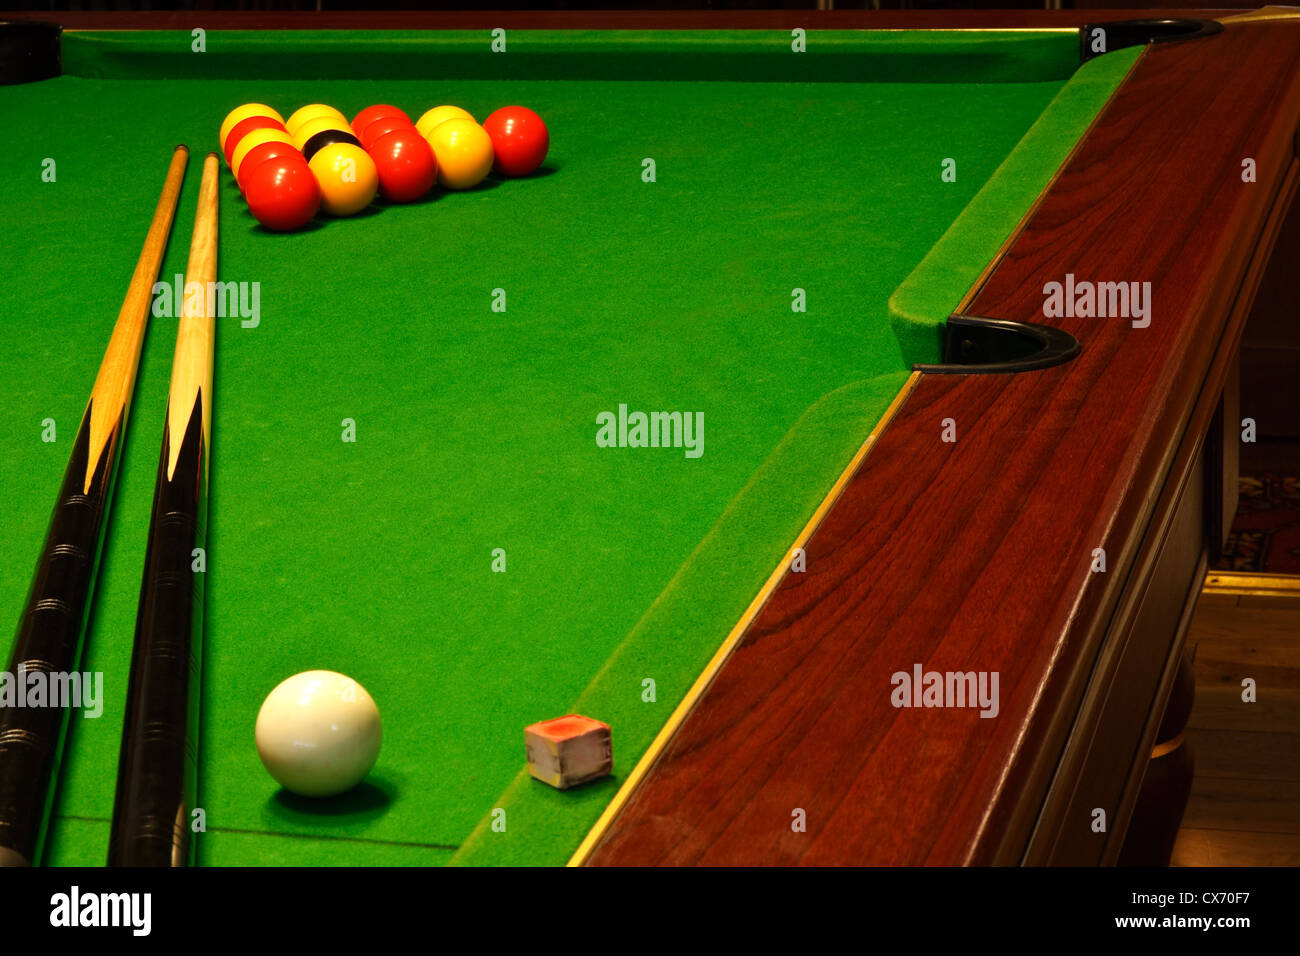 A green cloth billiards or pool table with english league red and yellow balls Stock Photo